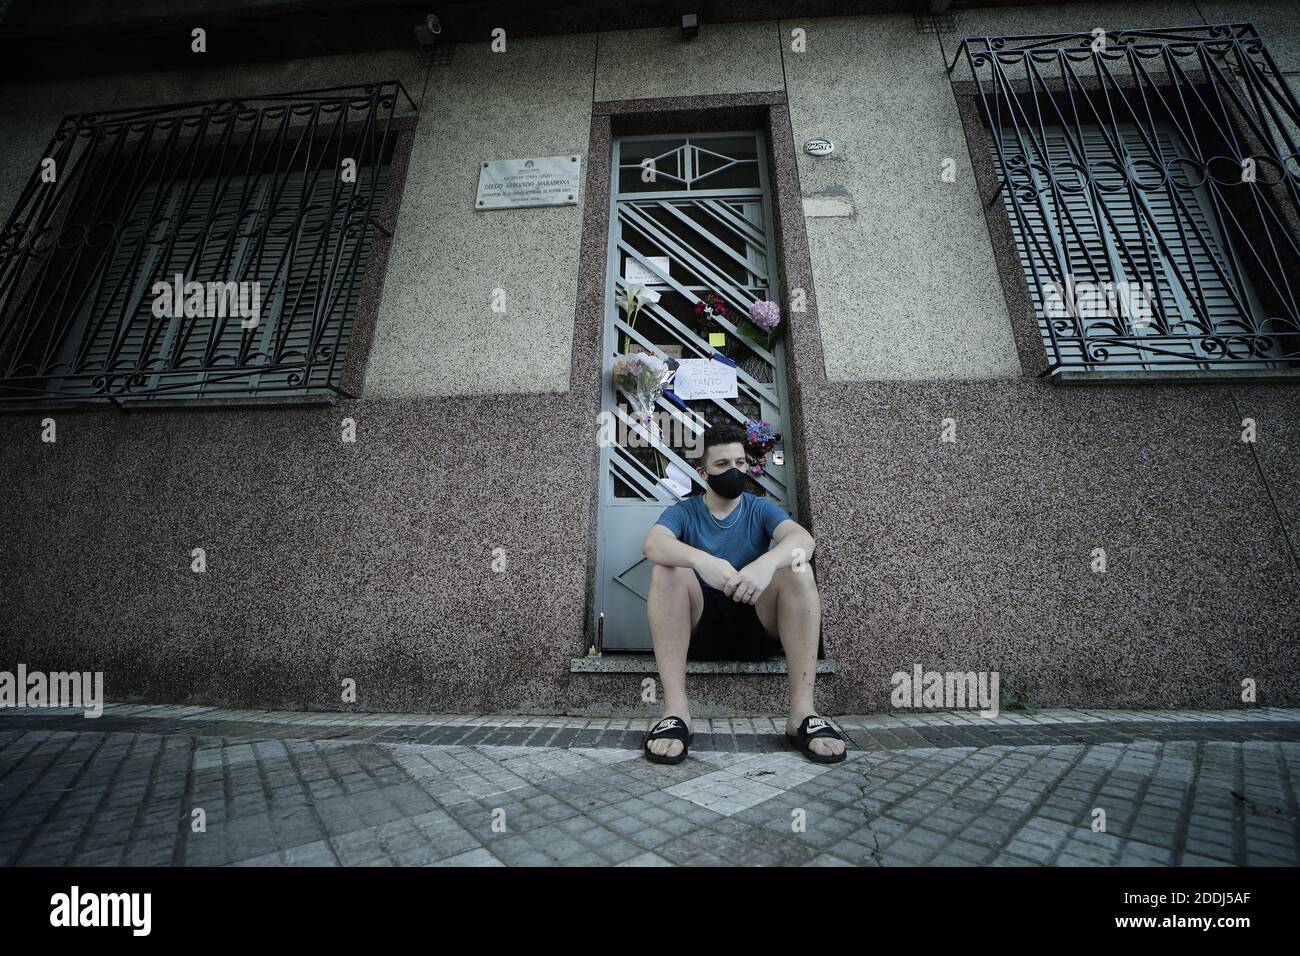 Buenos Aires, Argentina. 25th Nov, 2020. A young man sits at the door of Maradona's former residence in the La Paternal district after it became known that the football legend had died. Maradona lived in this house in the late 1970s when he played for the Argentinos Juniors football club. Credit: Gustavo Ortiz/dpa/Alamy Live News Stock Photo